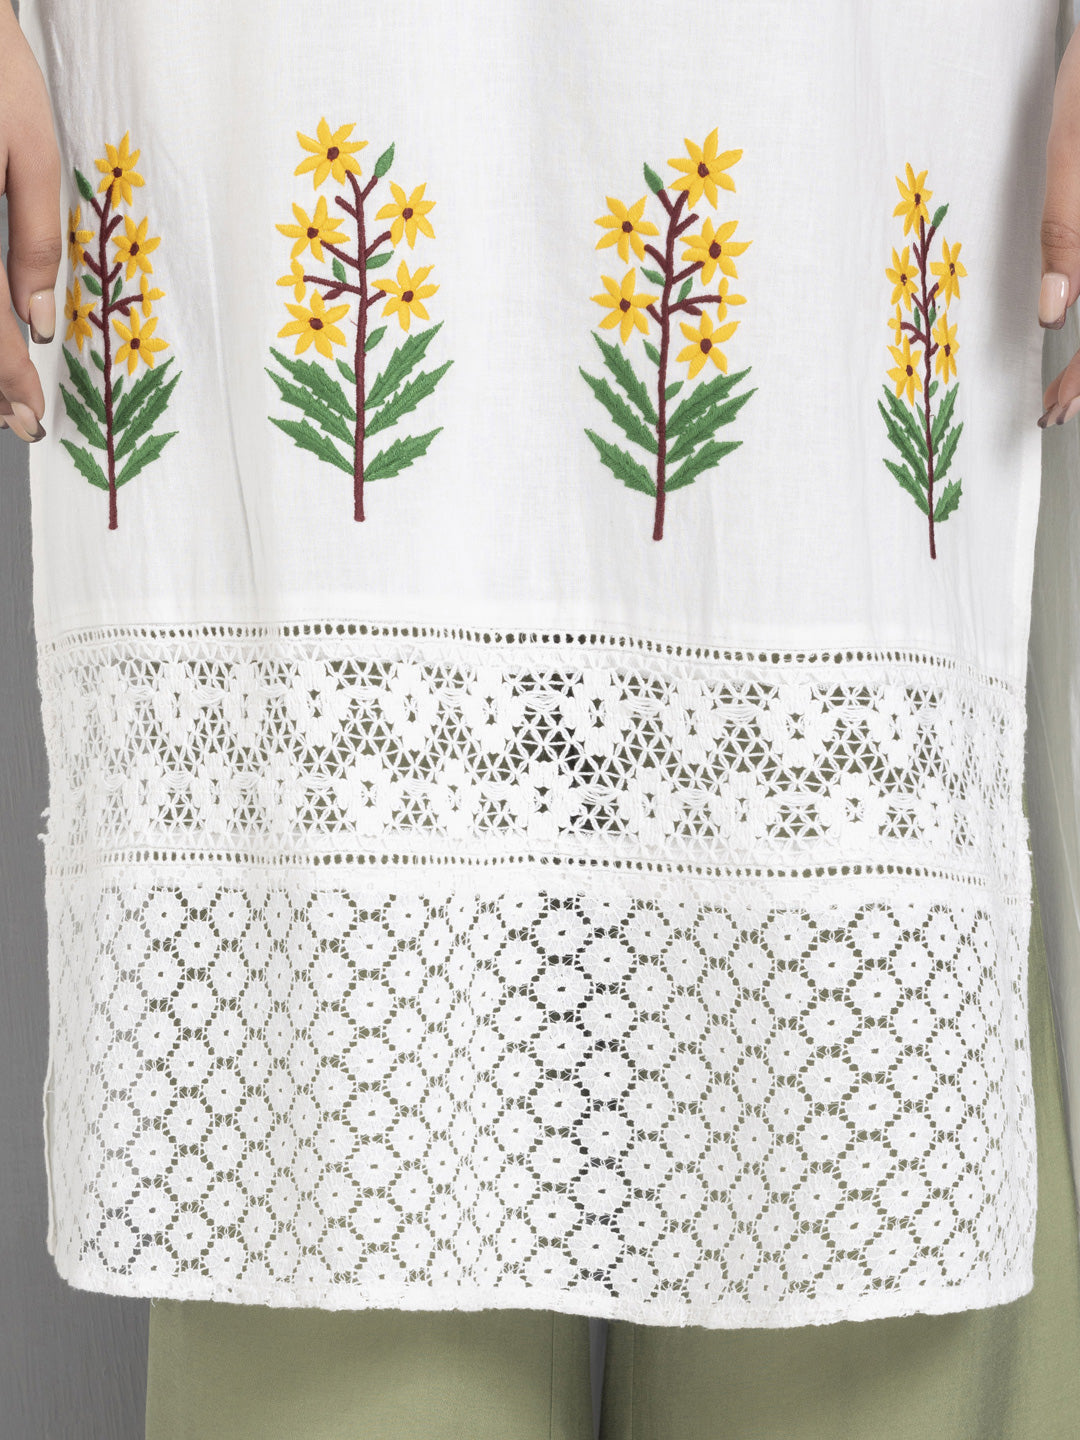 White floral embroidered Lace Trim Kurta from Shaye India , Kurta for women